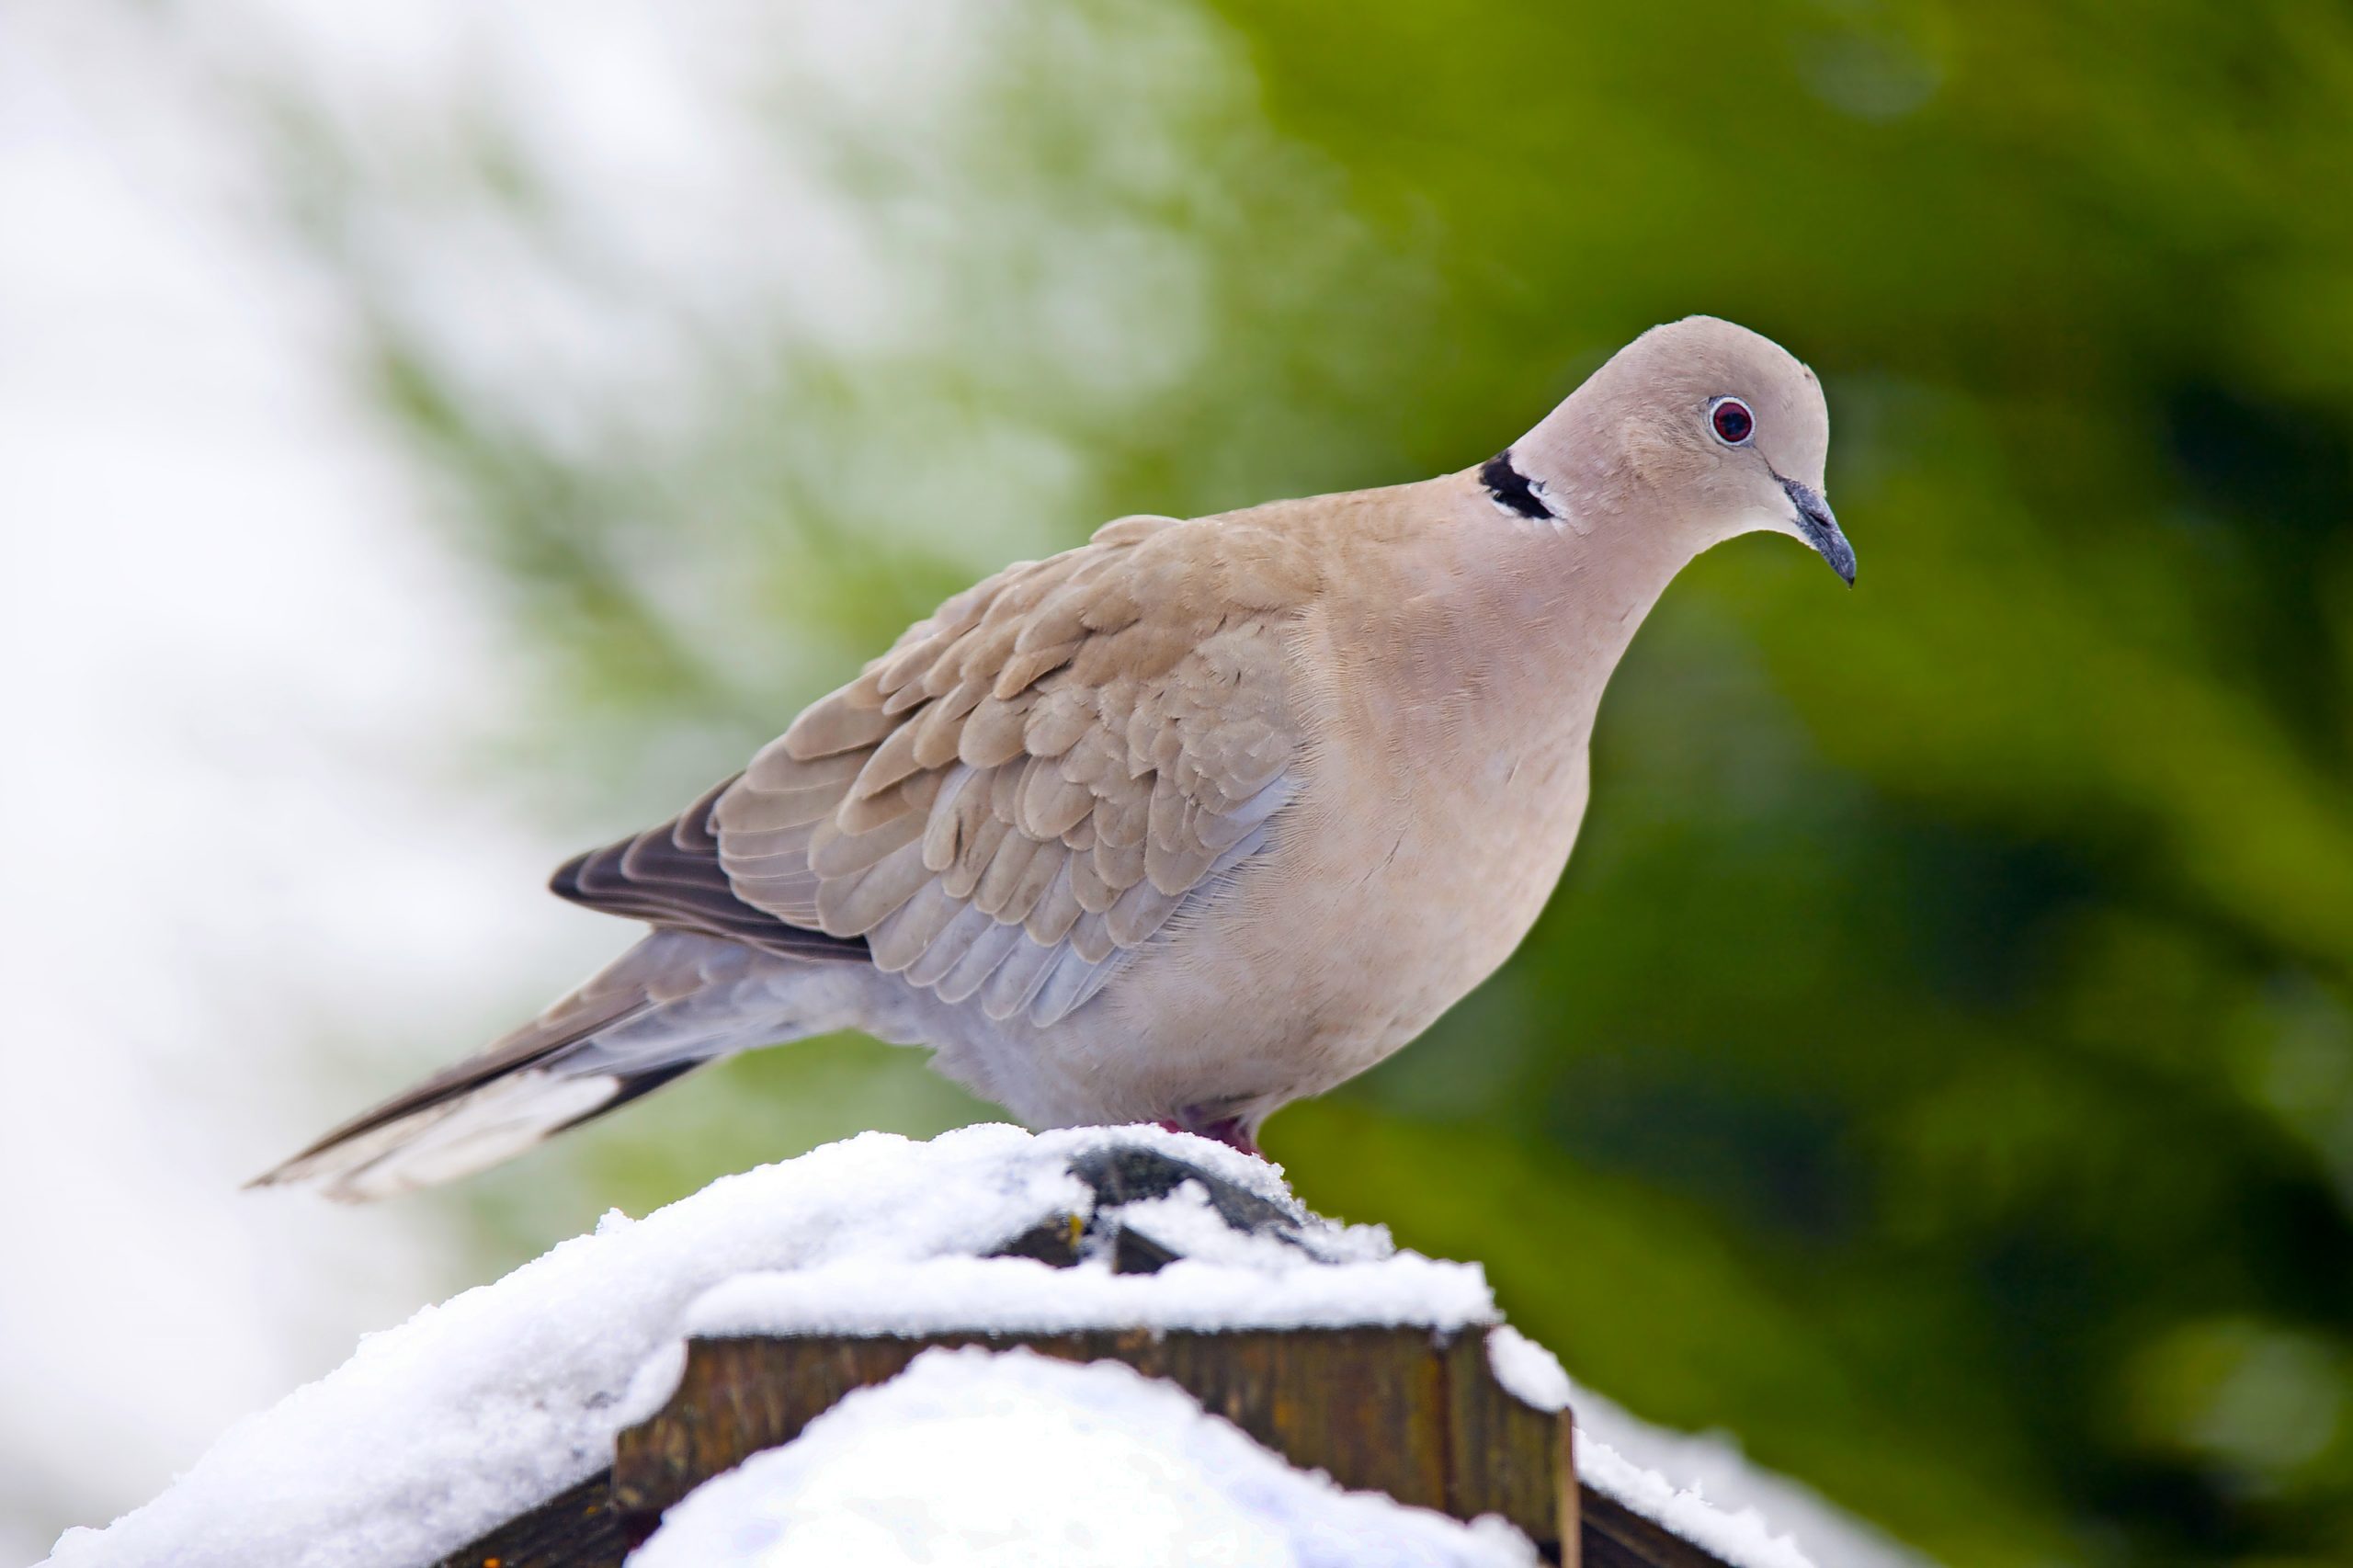 How to Identify a Eurasian Collared-Dove